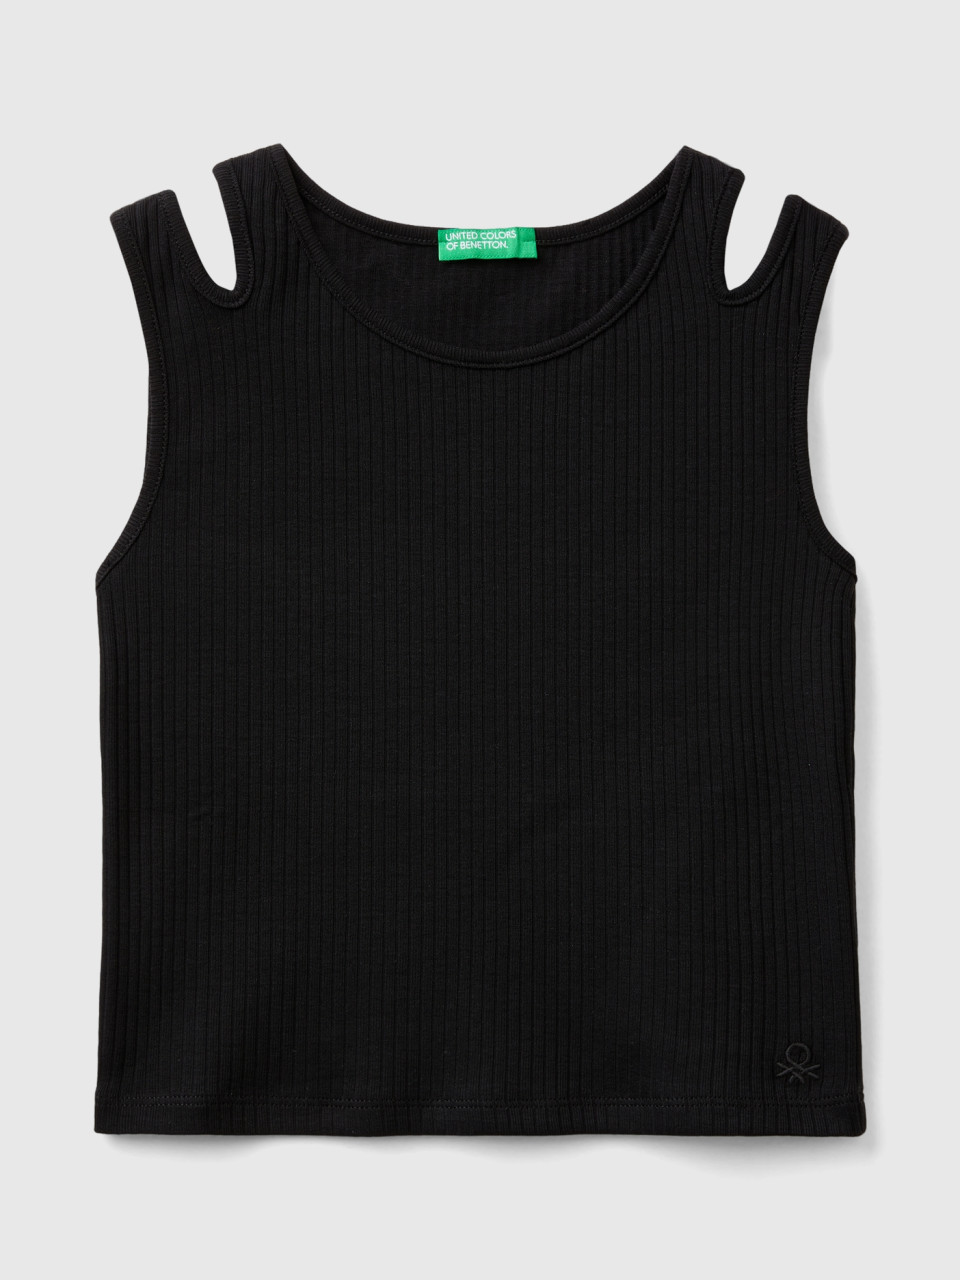 Benetton, Ribbed Cut-out Tank Top, Black, Kids